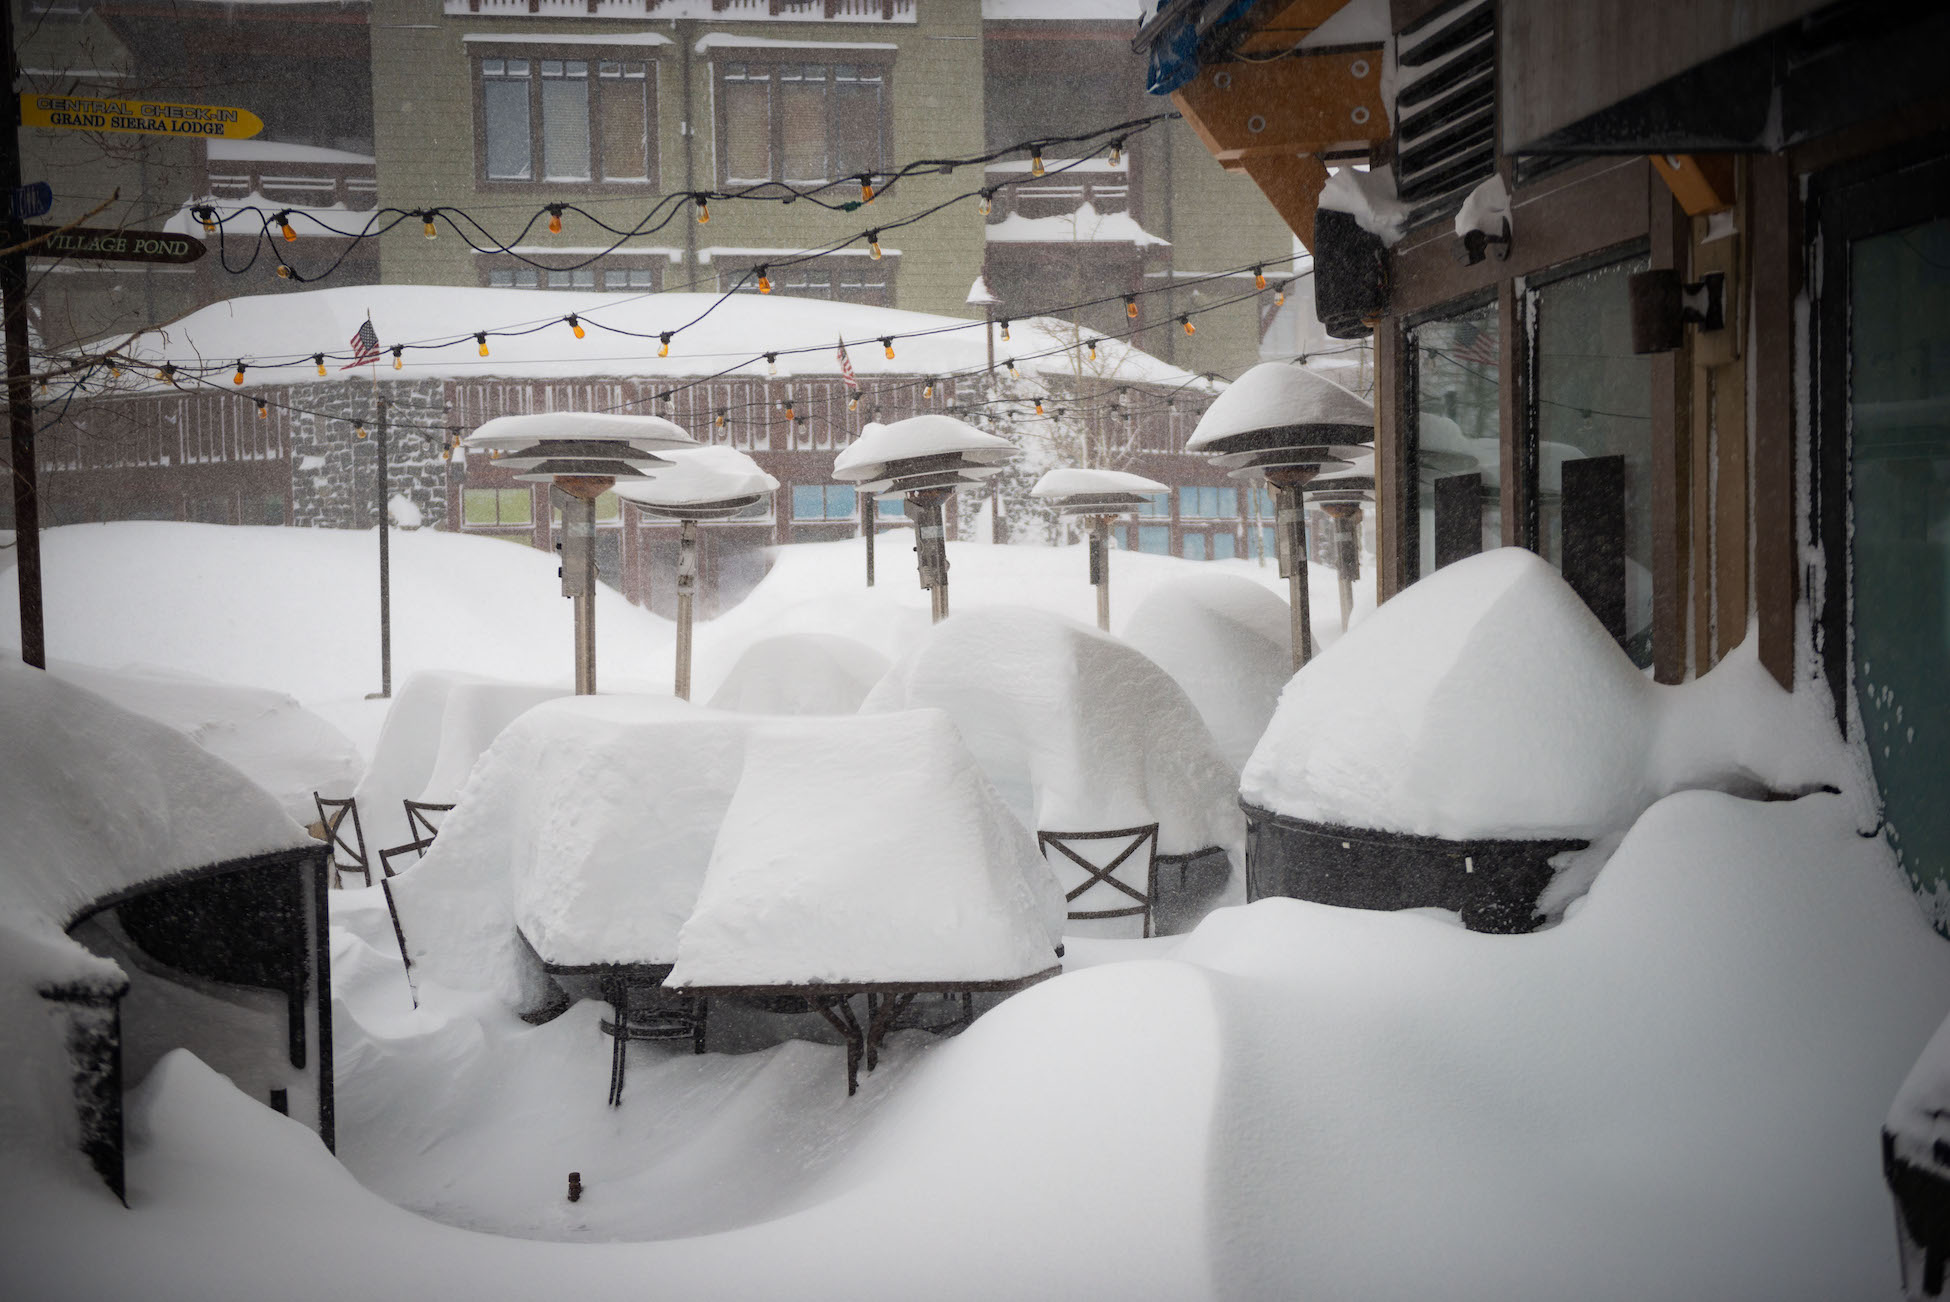 Photo: snow piled on tables